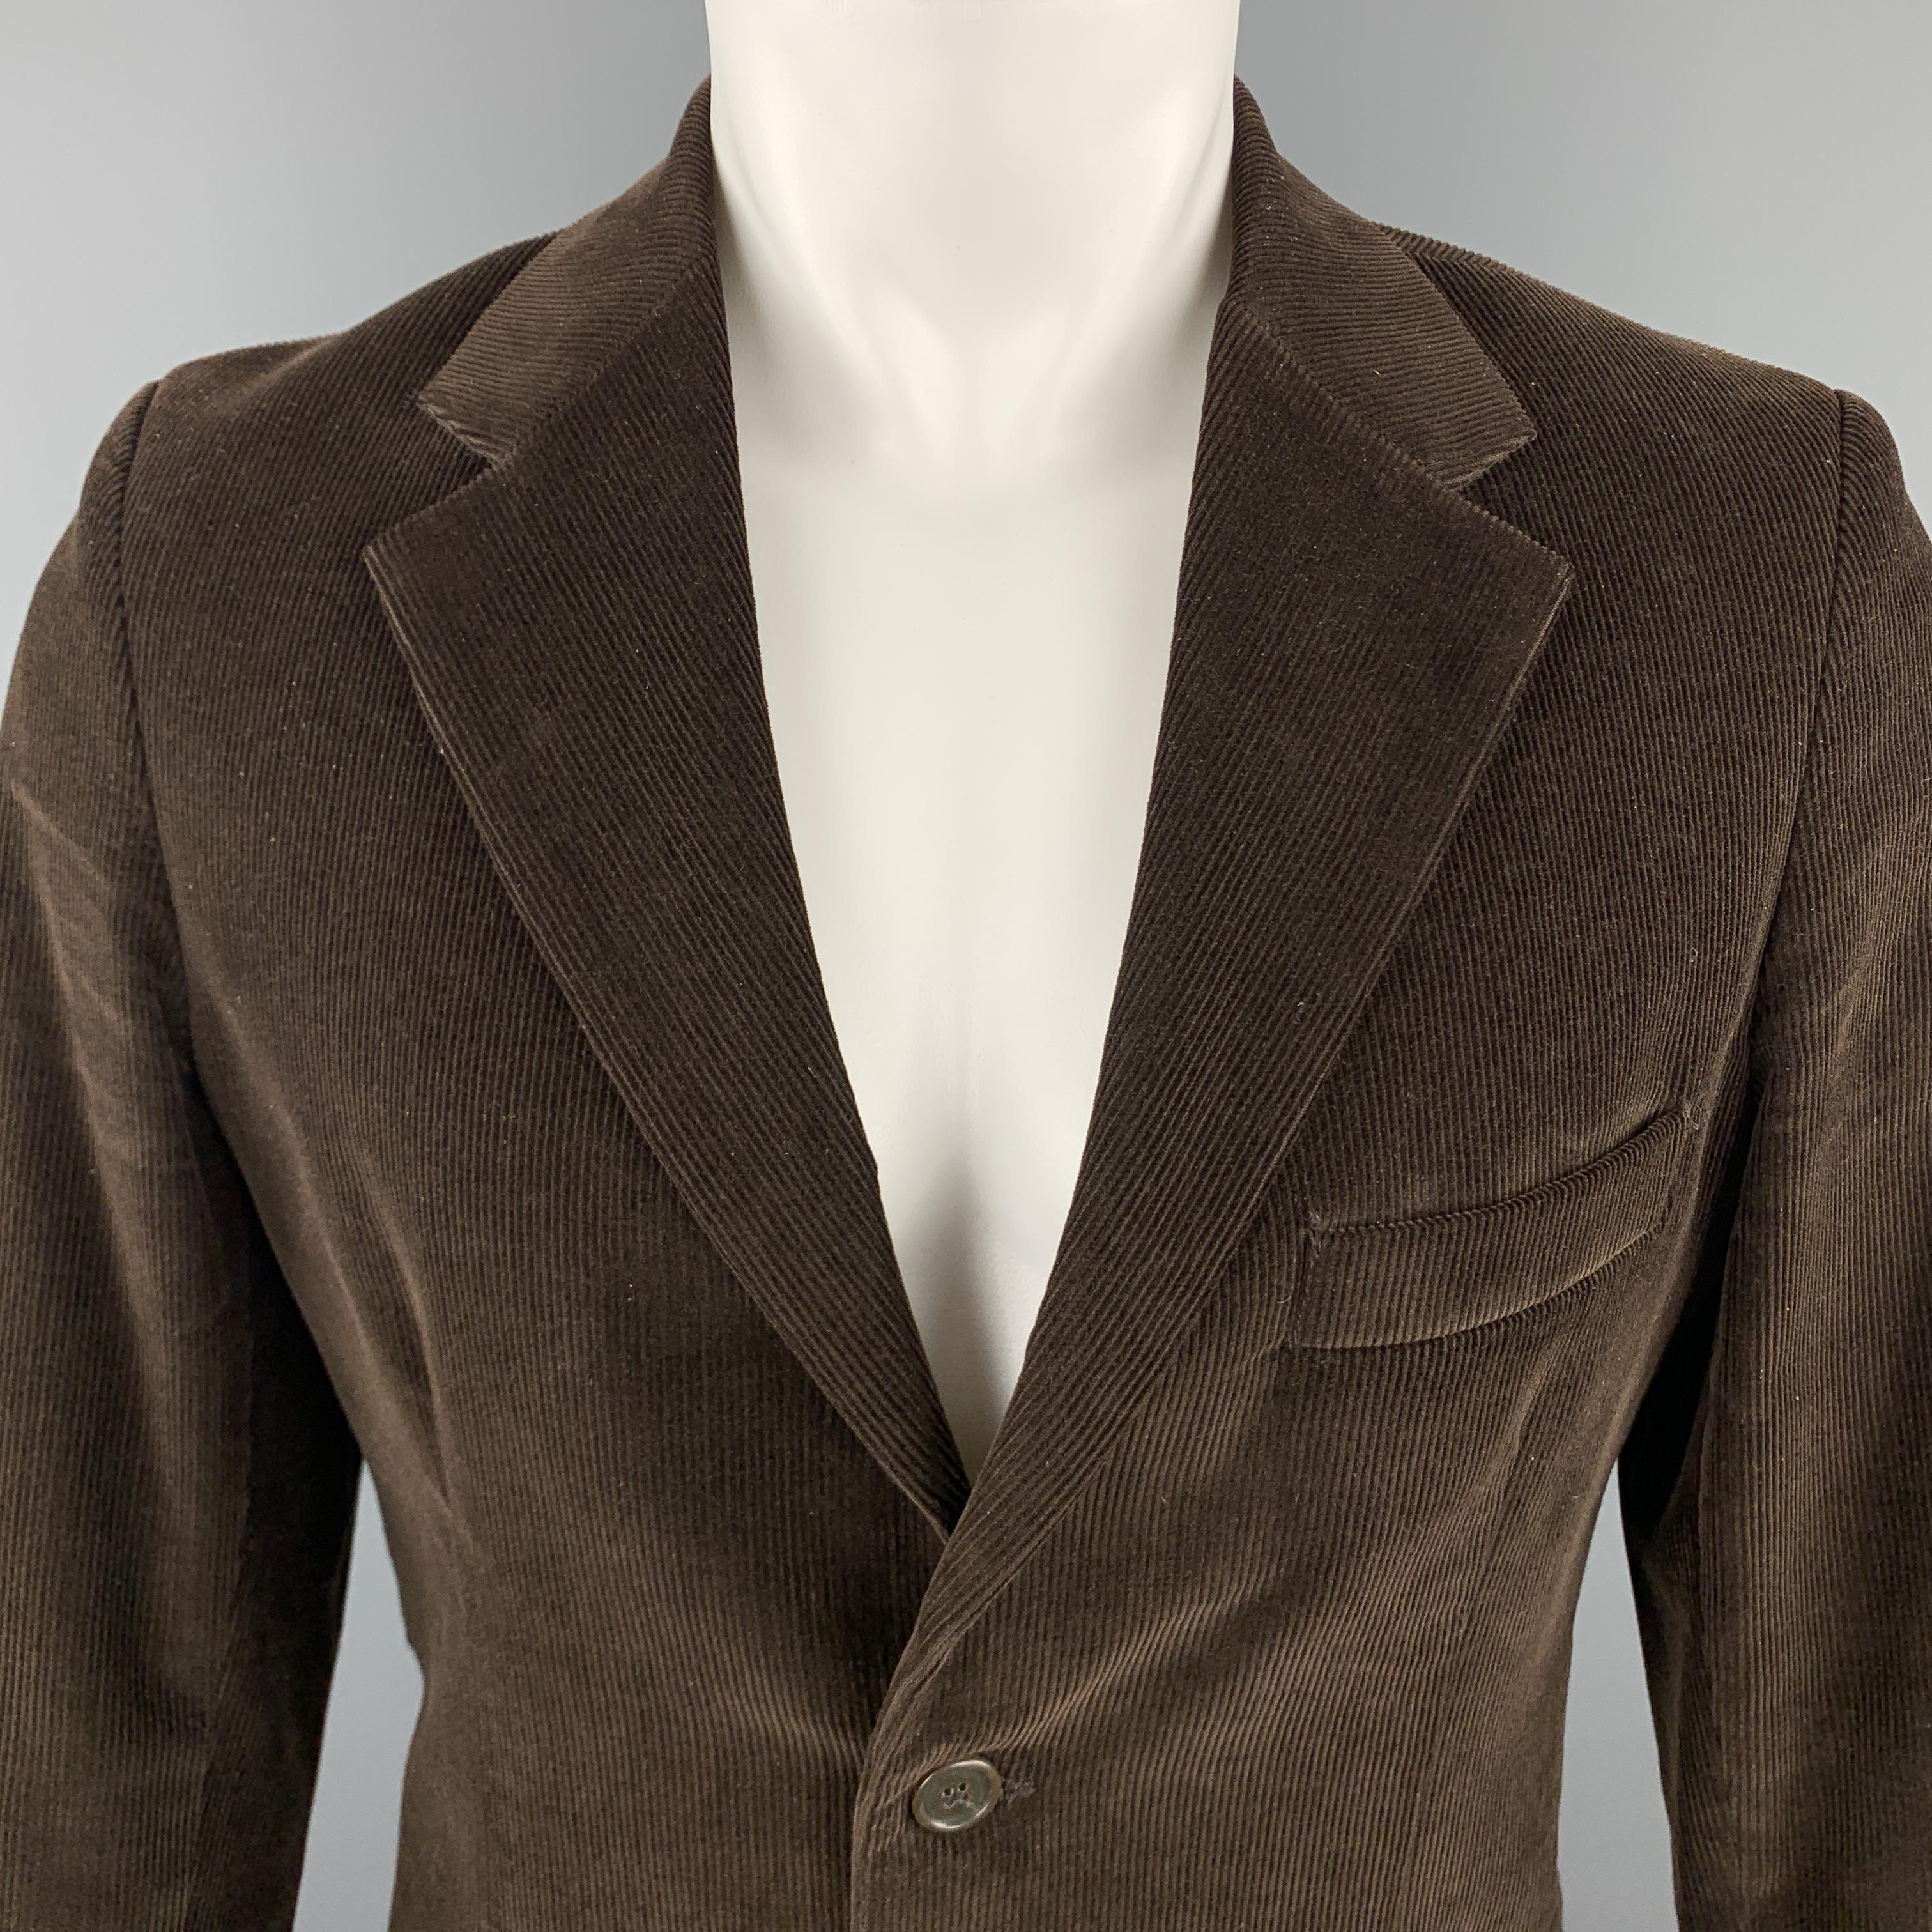 BARNEY'S CO-OP sport coat comes in a solid brown corduroy cotton material, with a notch lapel, slit and flap pockets, two buttons at closure, single breasted, buttoned cuffs, and a single vent at back. Made in Italy.

Excellent Pre-Owned